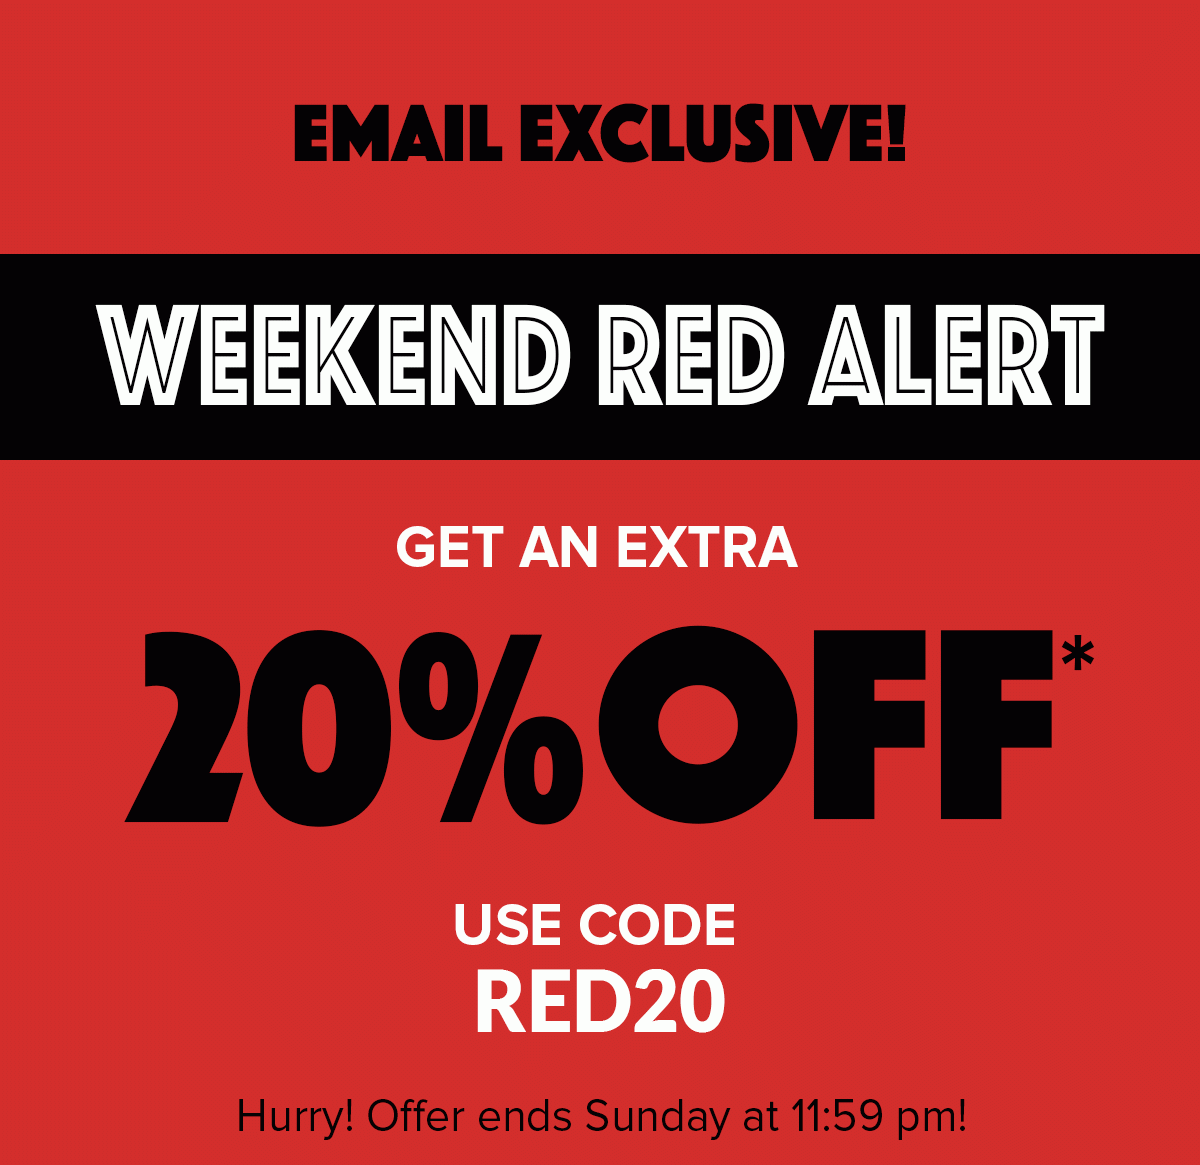 WEEKEND RED ALERT – 20% OFF with code RED20. Offer ends Sunday at 11:59 PM ET.